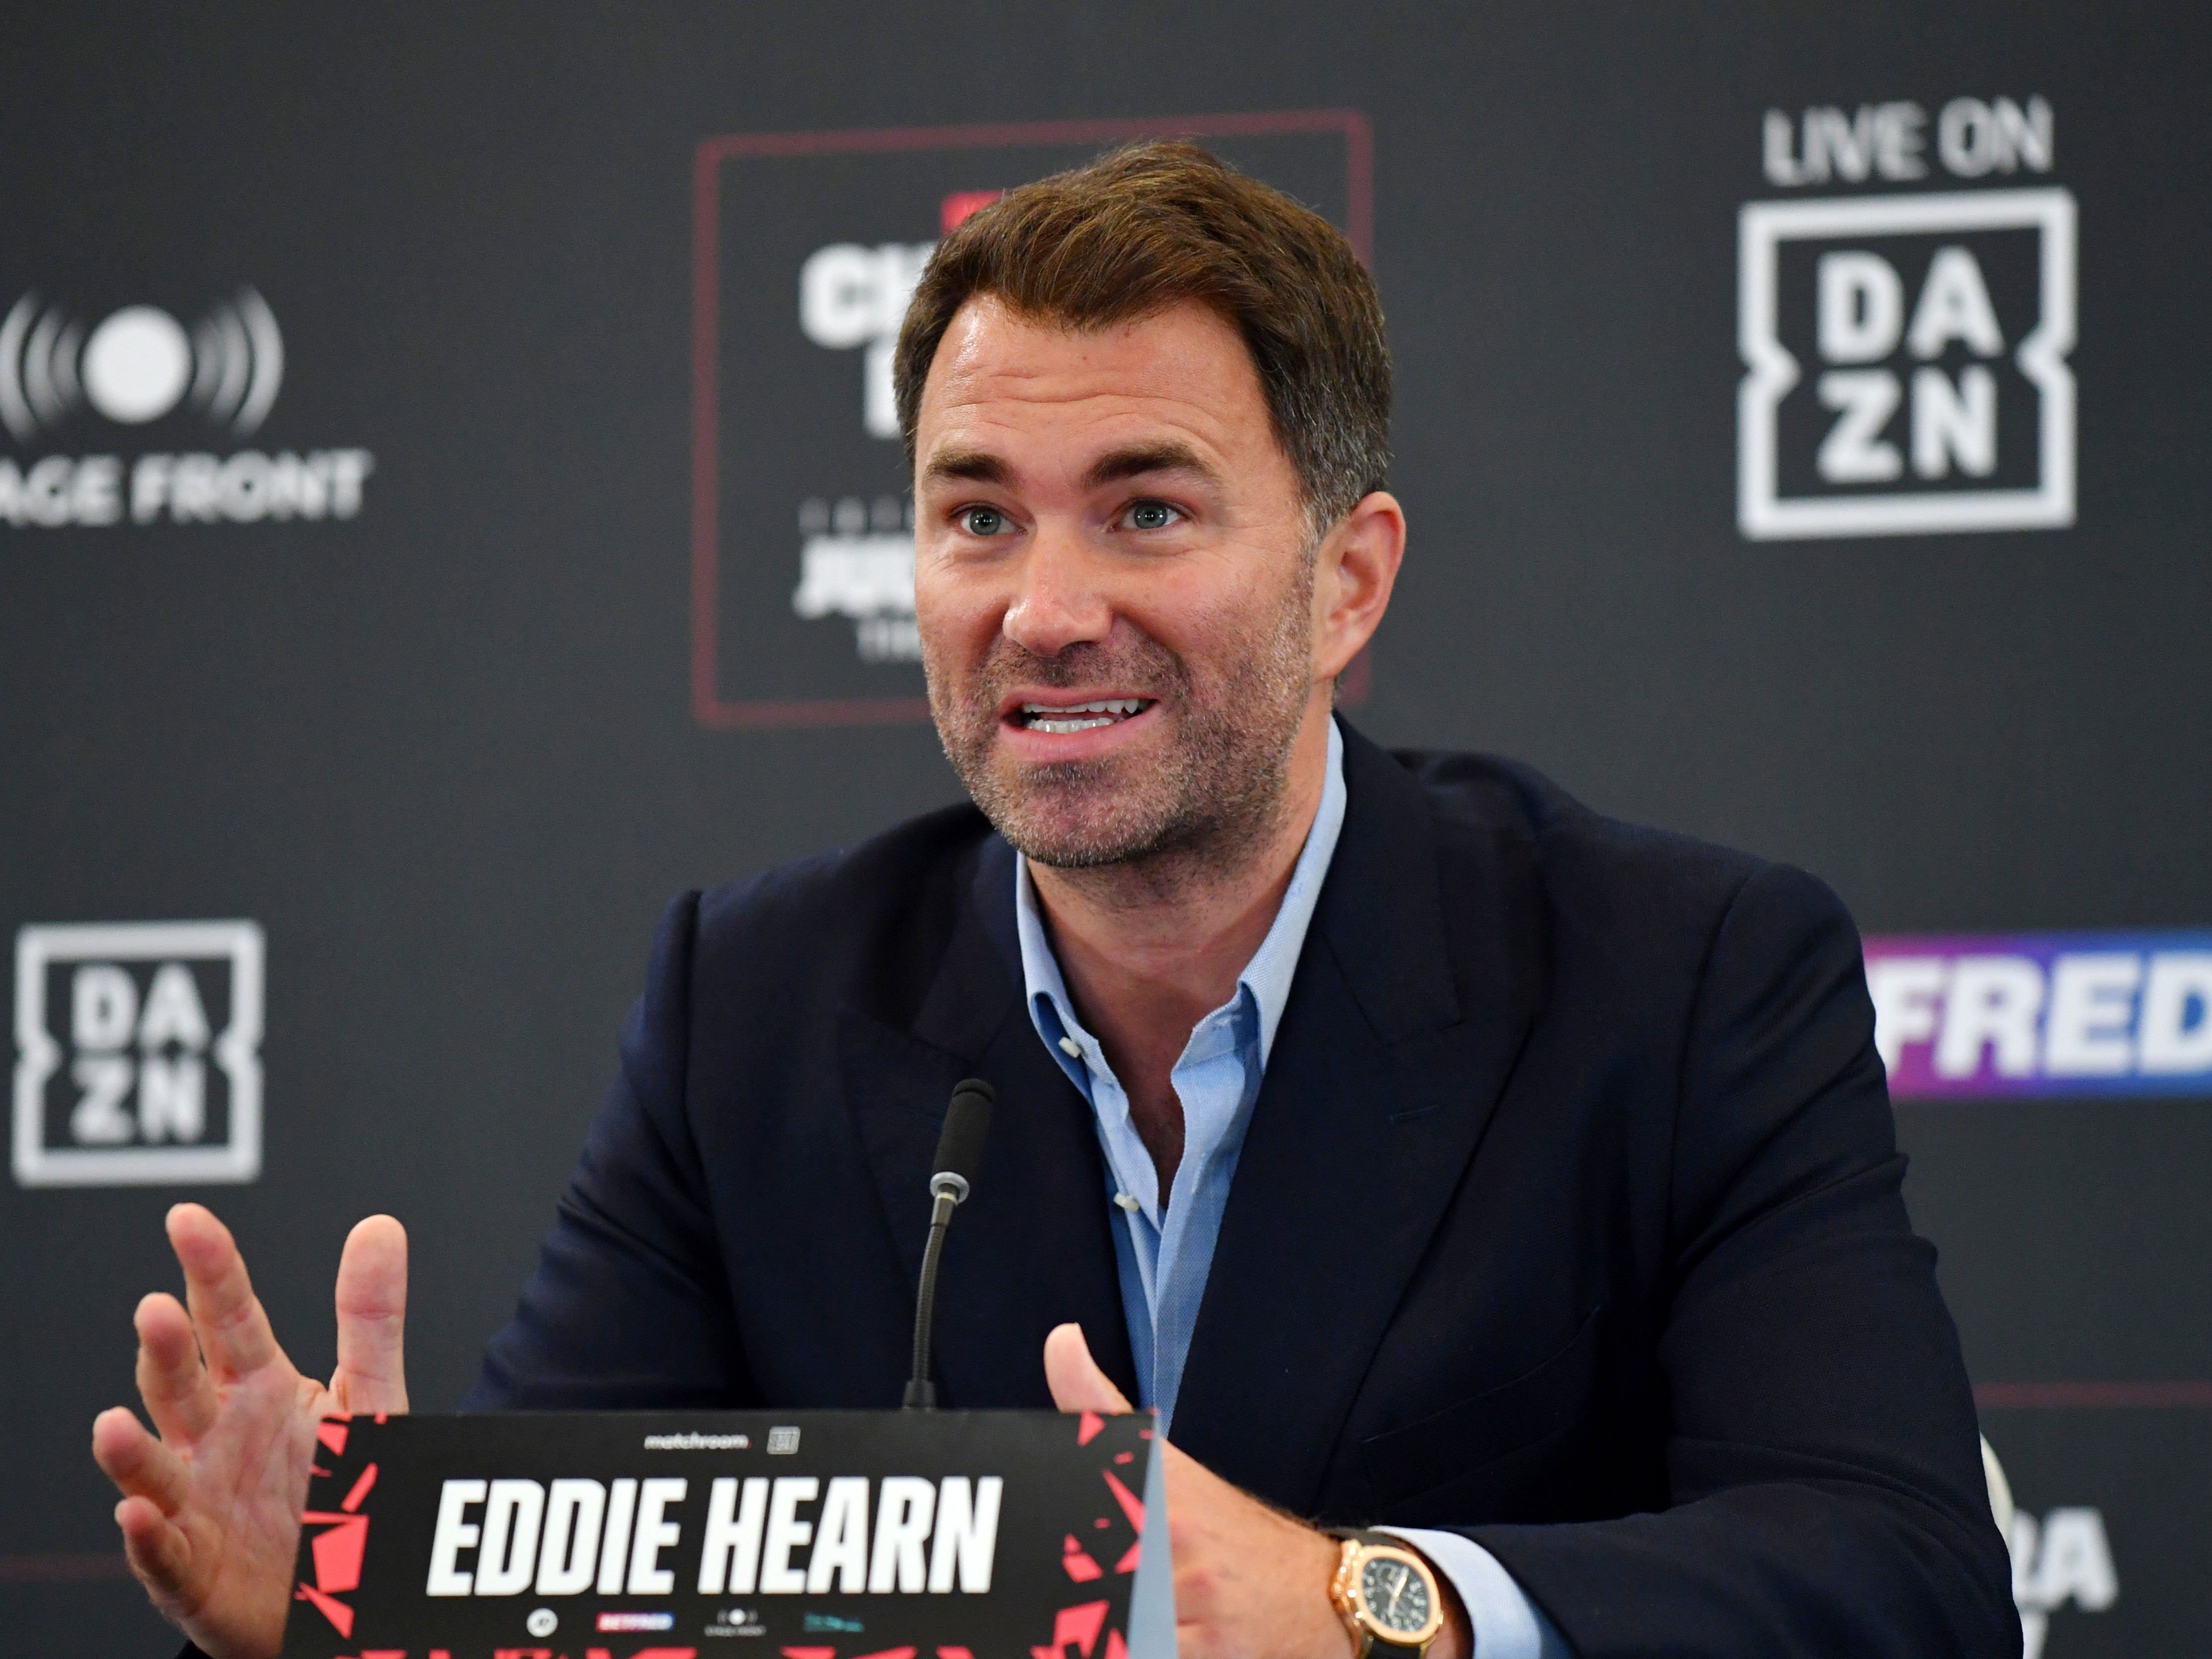 Eddie Hearn has said Joshua vs Usyk 2 is likely to take place in Saudi Arabia in August